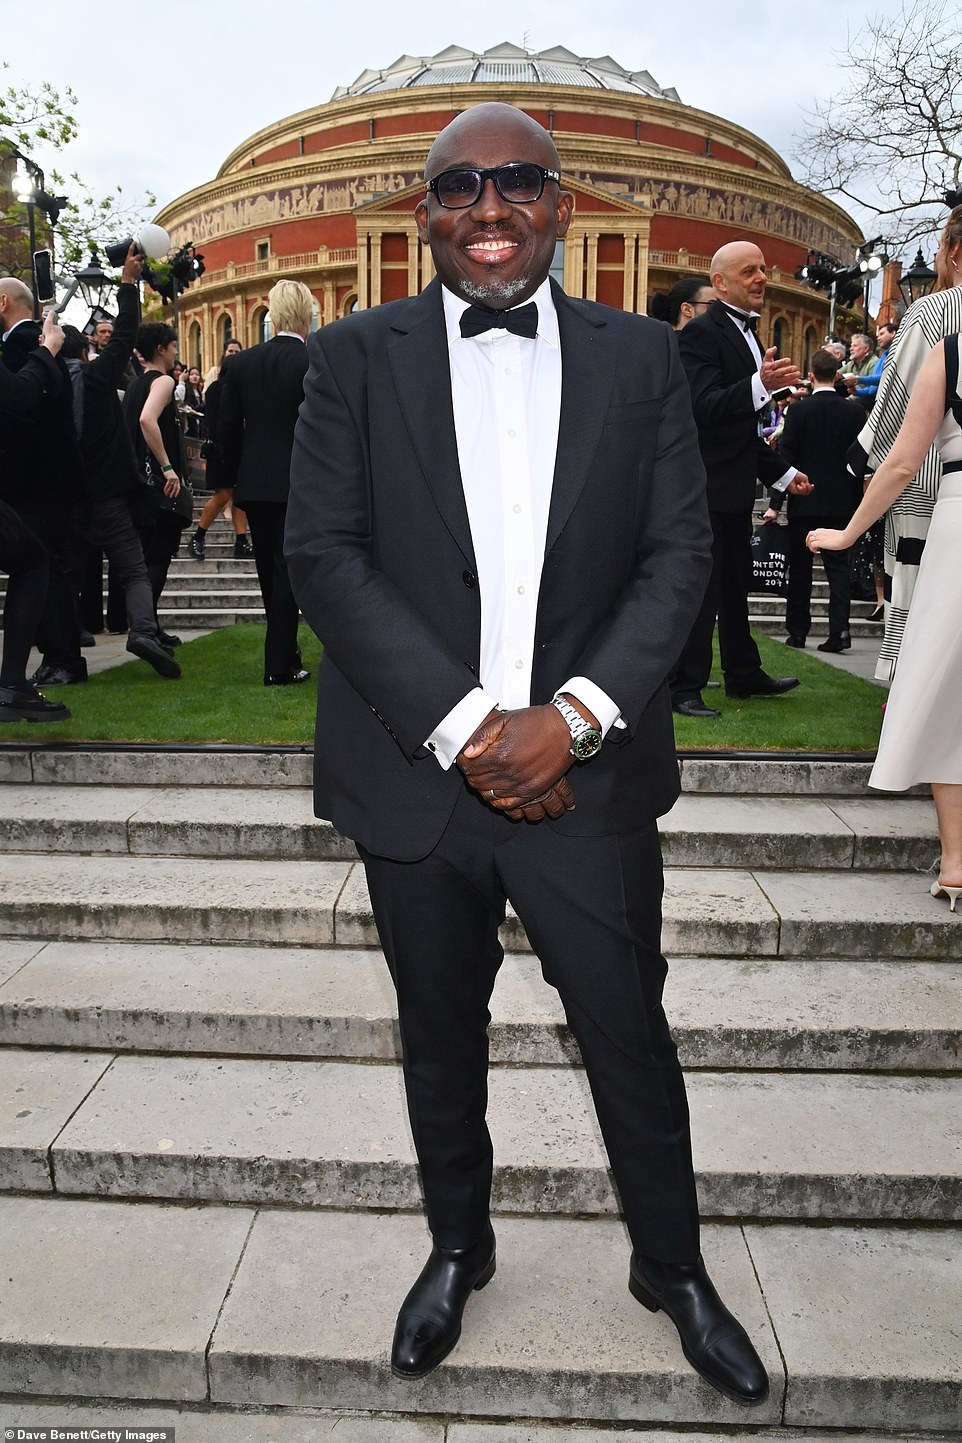 Edward Enninful looked suave in a classic black suit, white shirt and small bow tie, while donning tinted shades